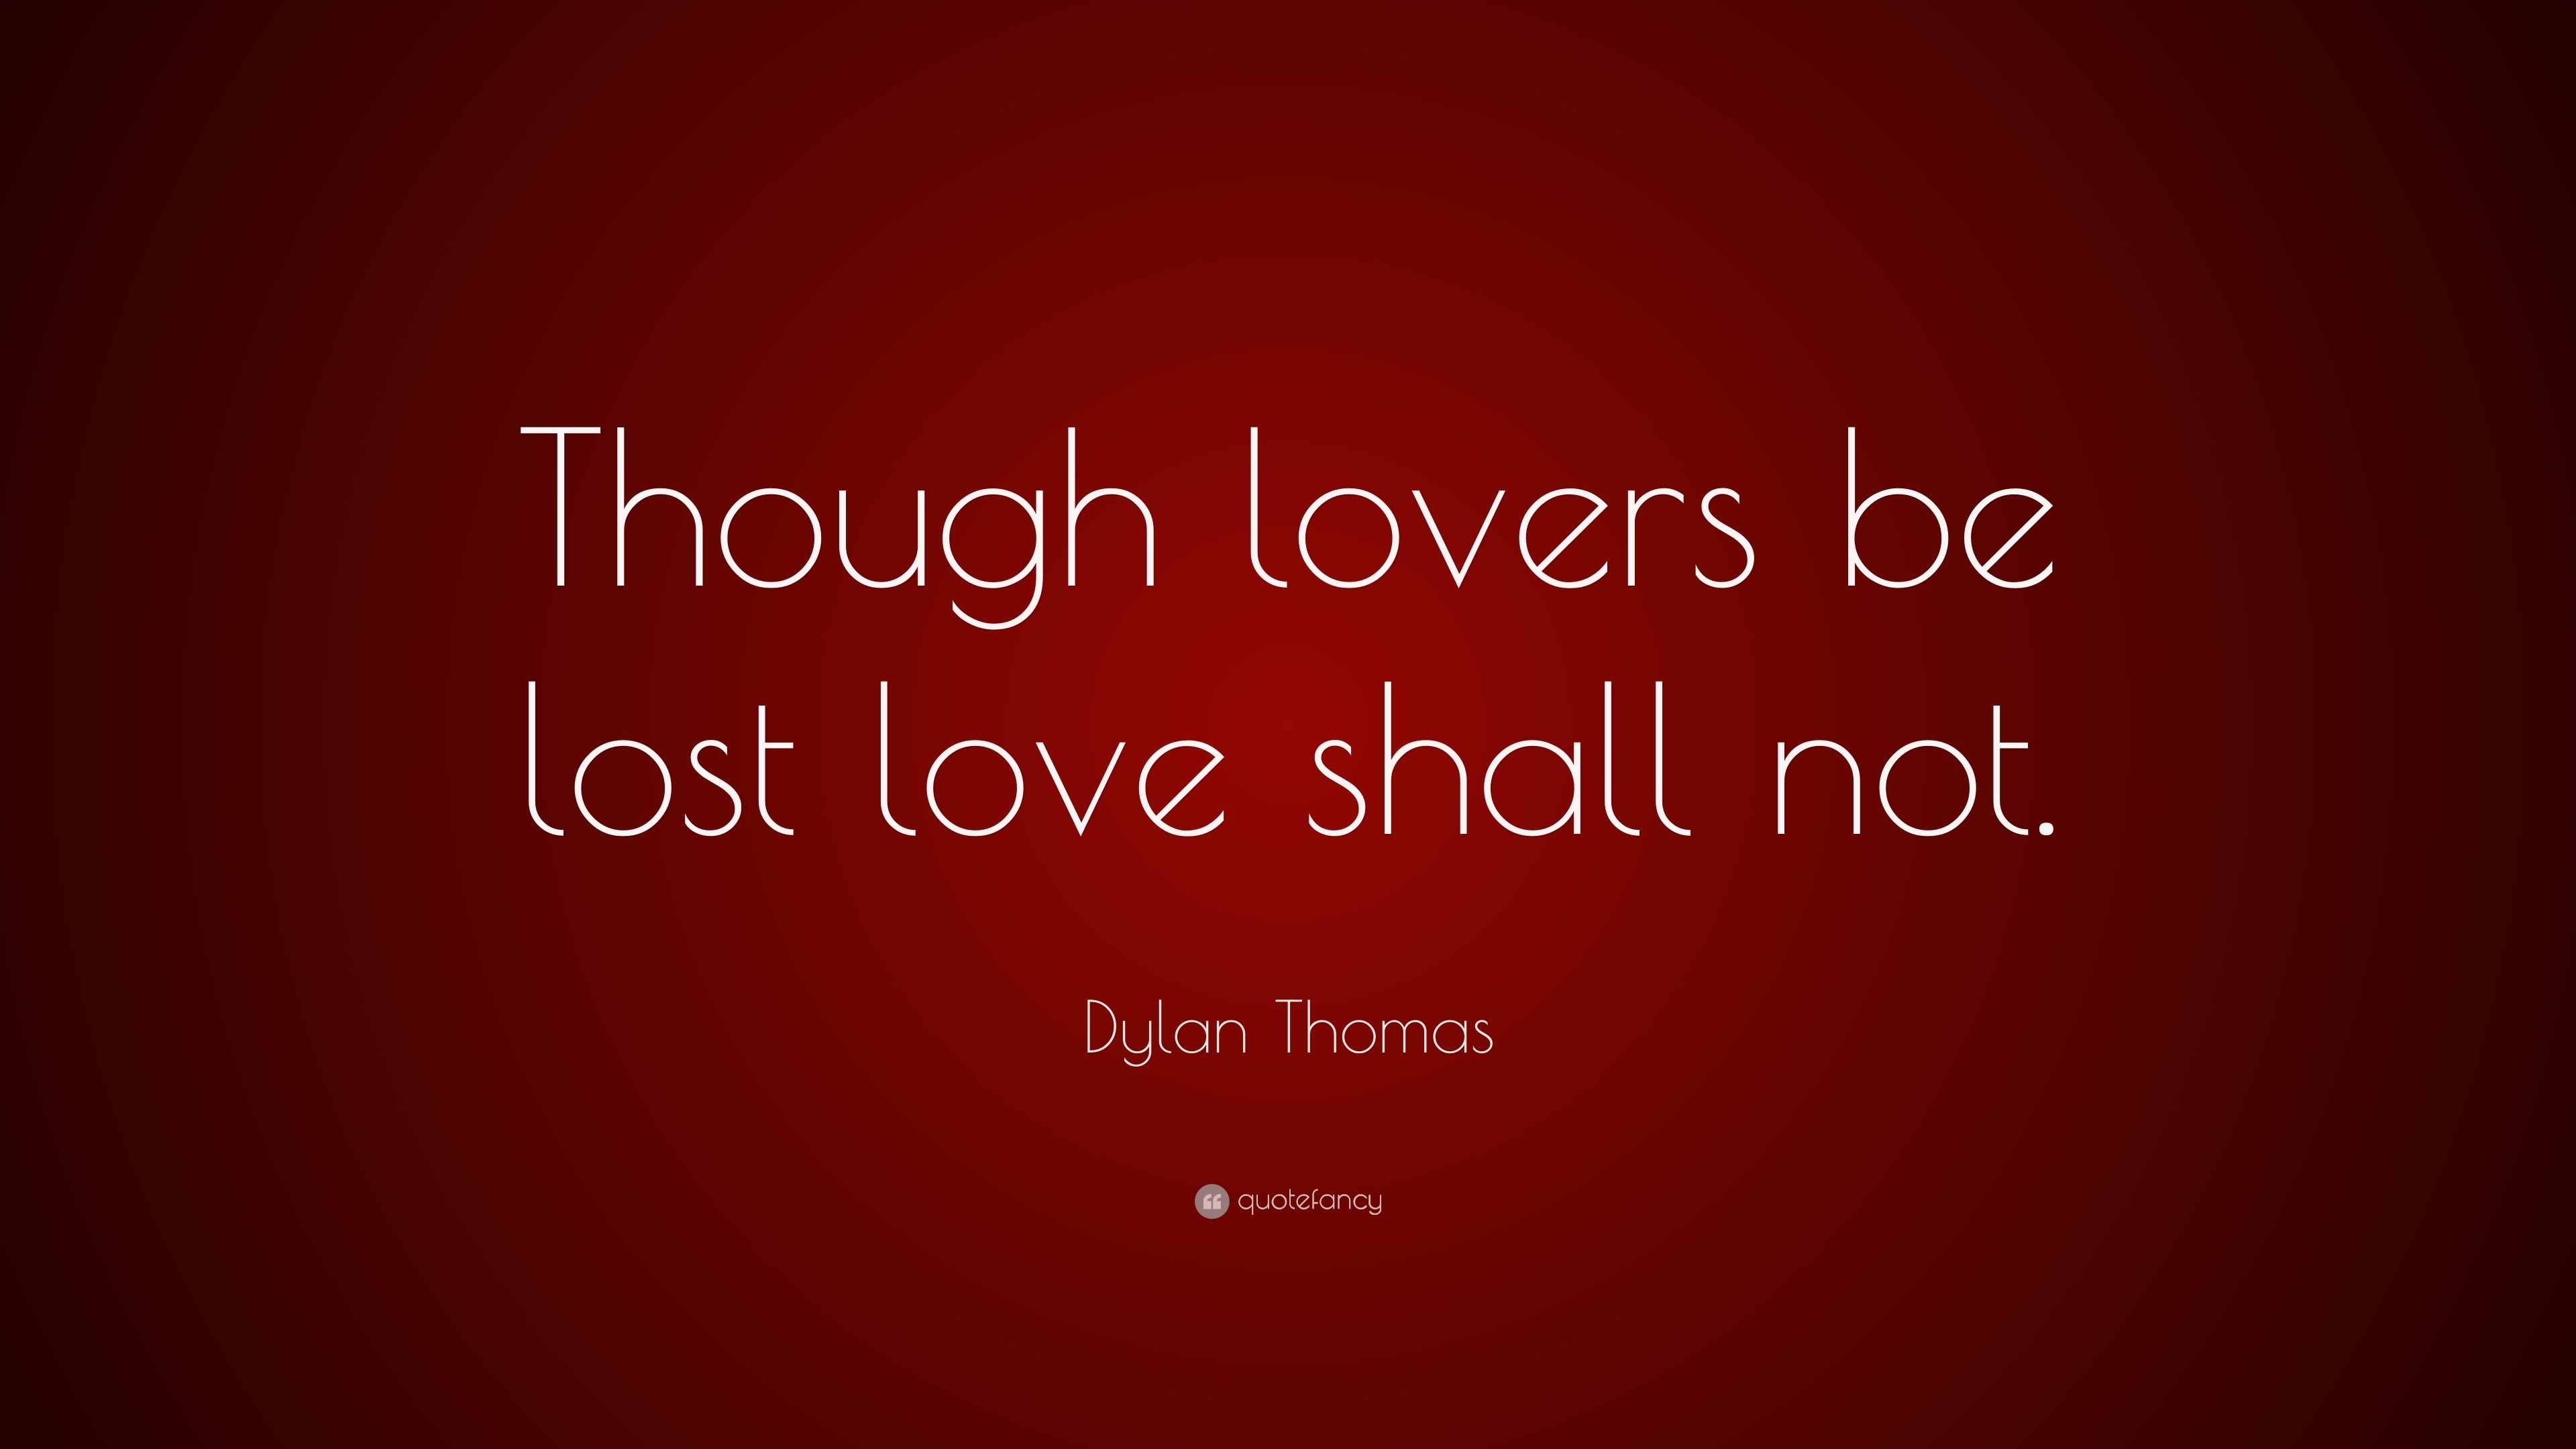 Dylan Thomas Quote: “Though lovers be lost love shall not.” (12 wallpaper)